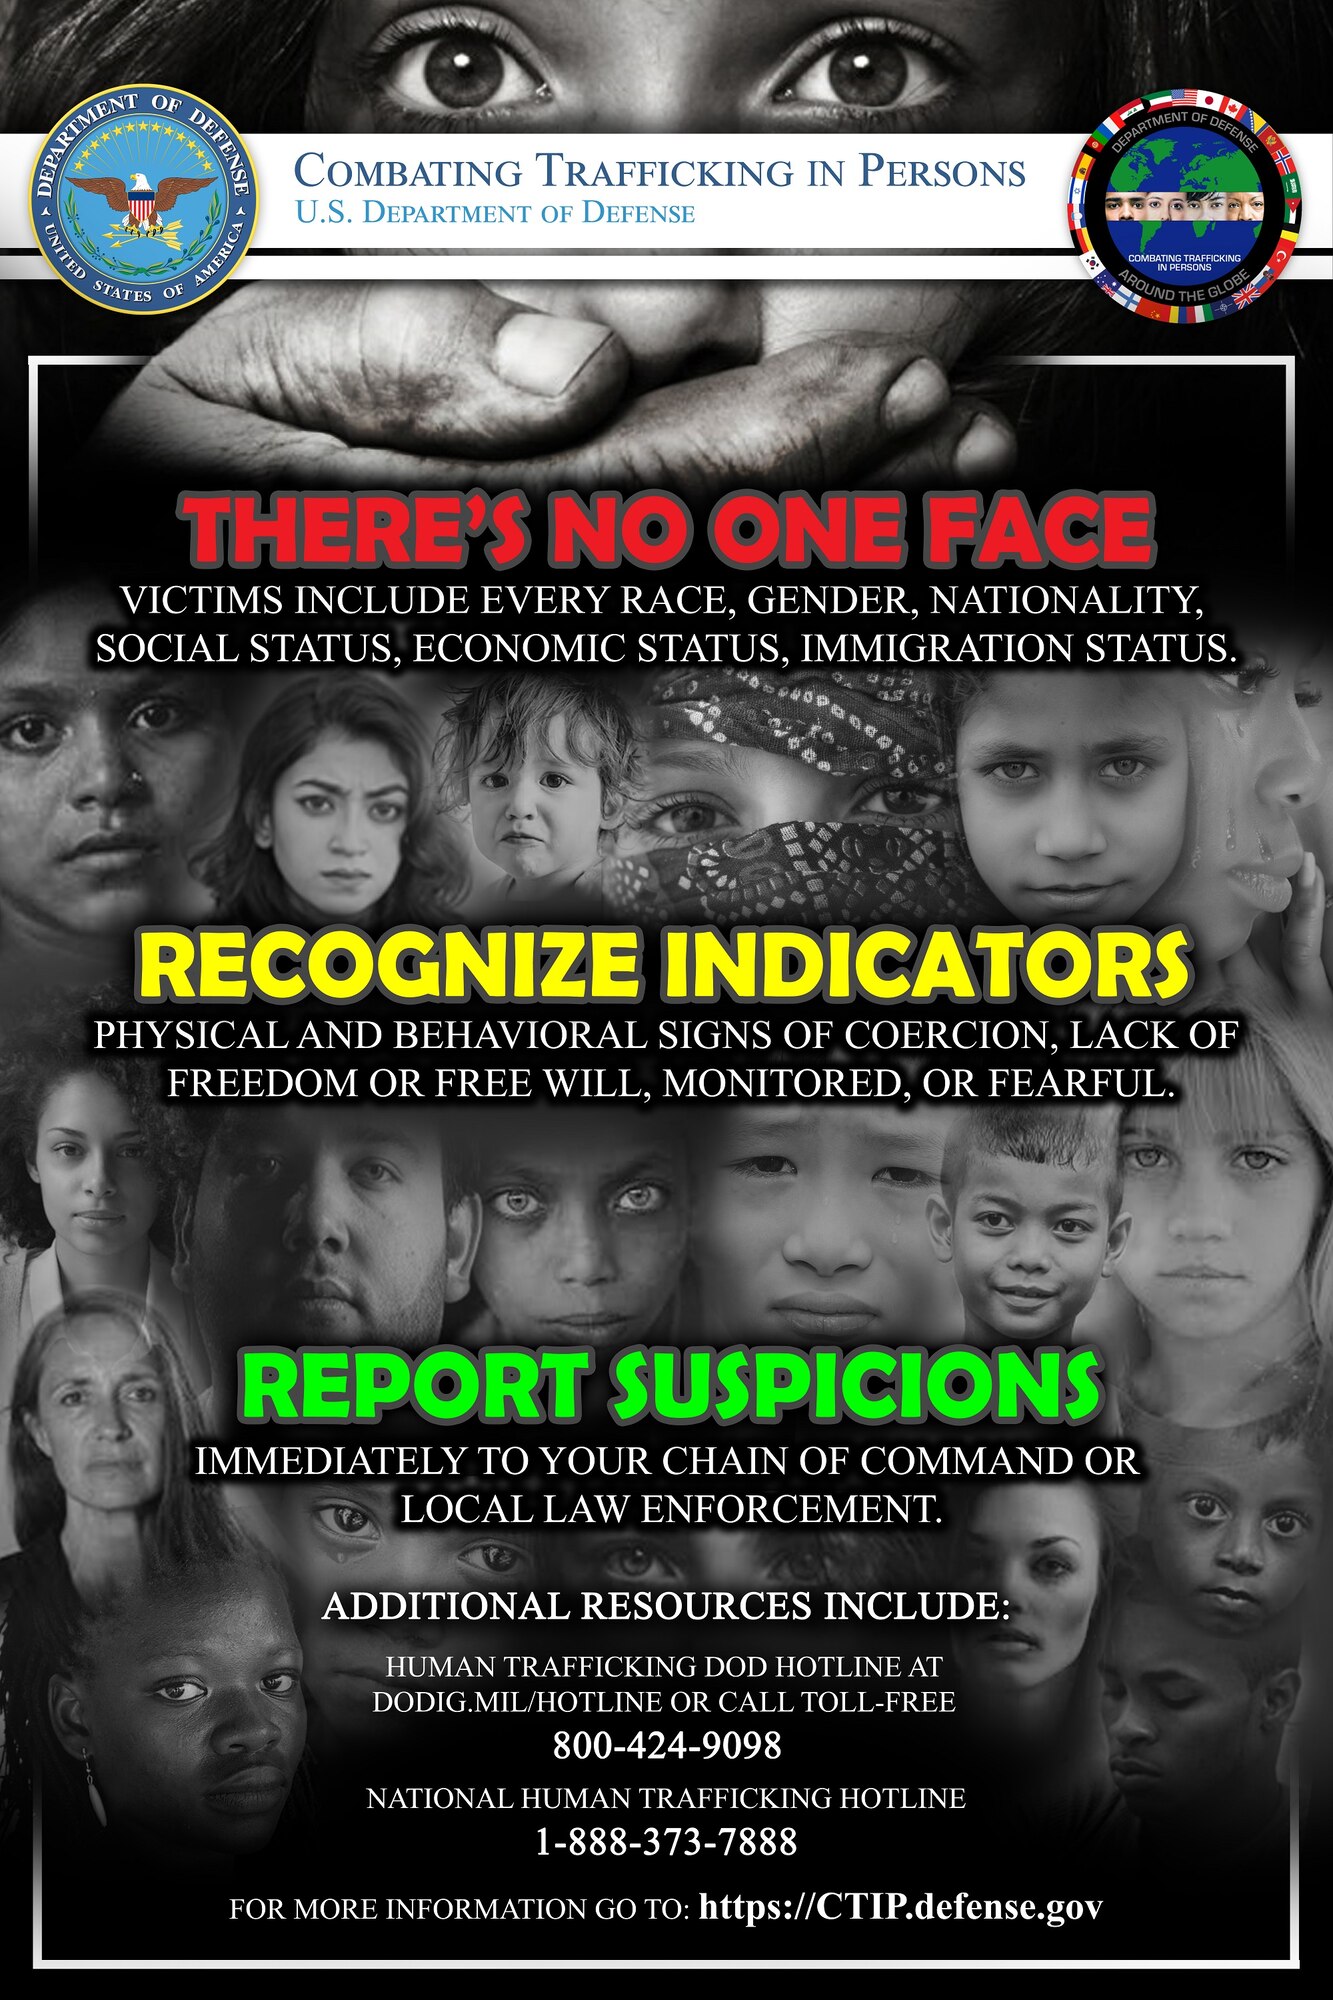 Combating Trafficking in Persons poster. (Courtesy of  Department of Defense)